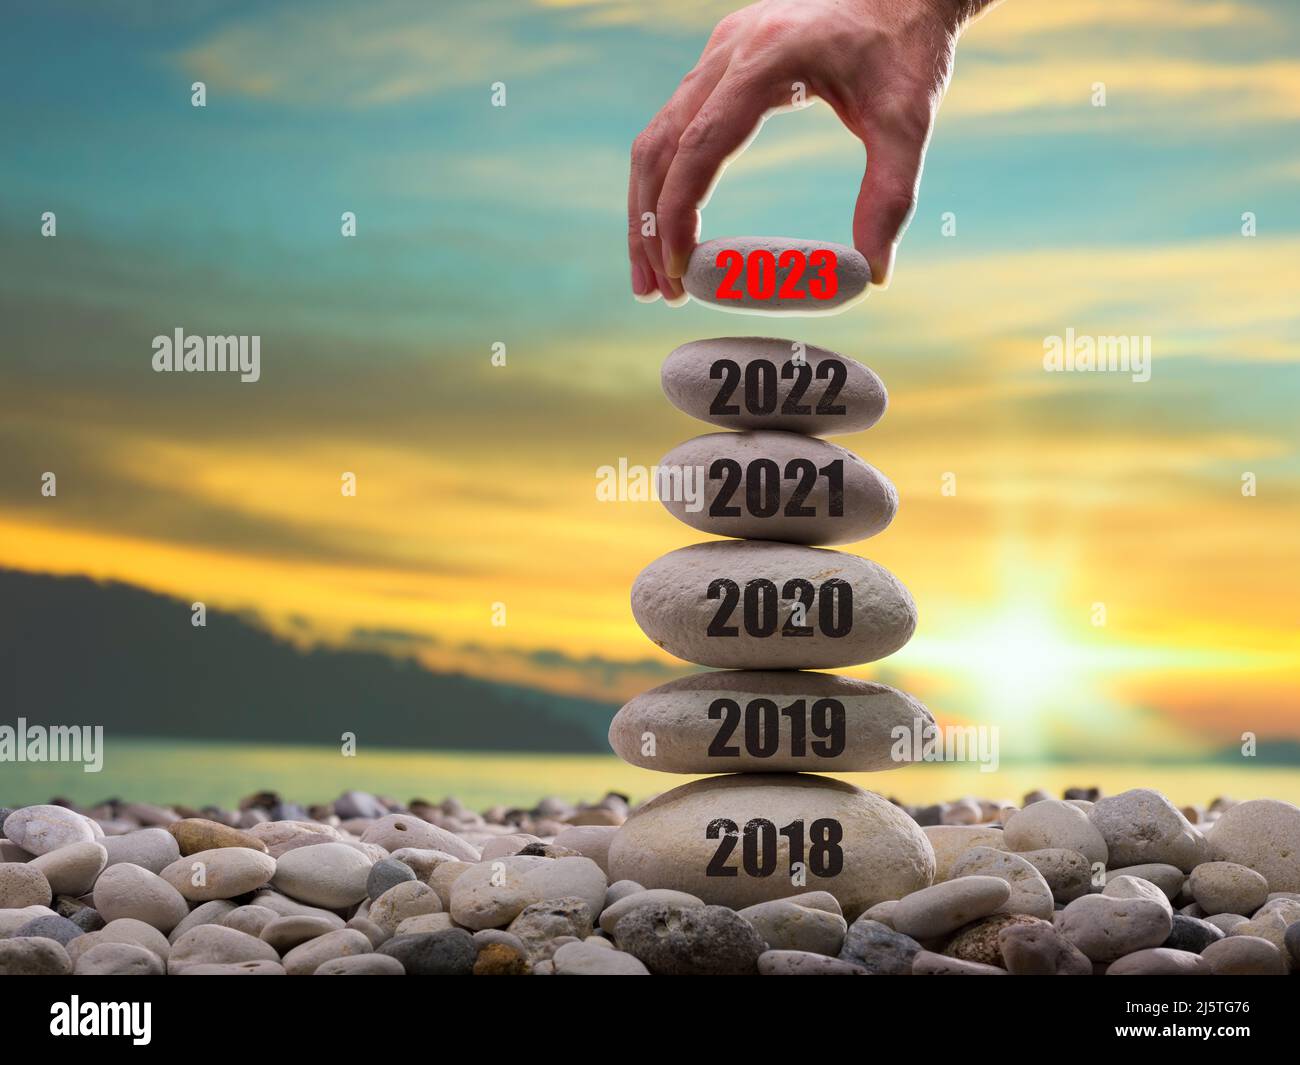 Happy new year 2023 concept. Entering the year 2023. Years ( 2018-2019-2020-2021-2022 ) written on the rising stone pile. Stock Photo